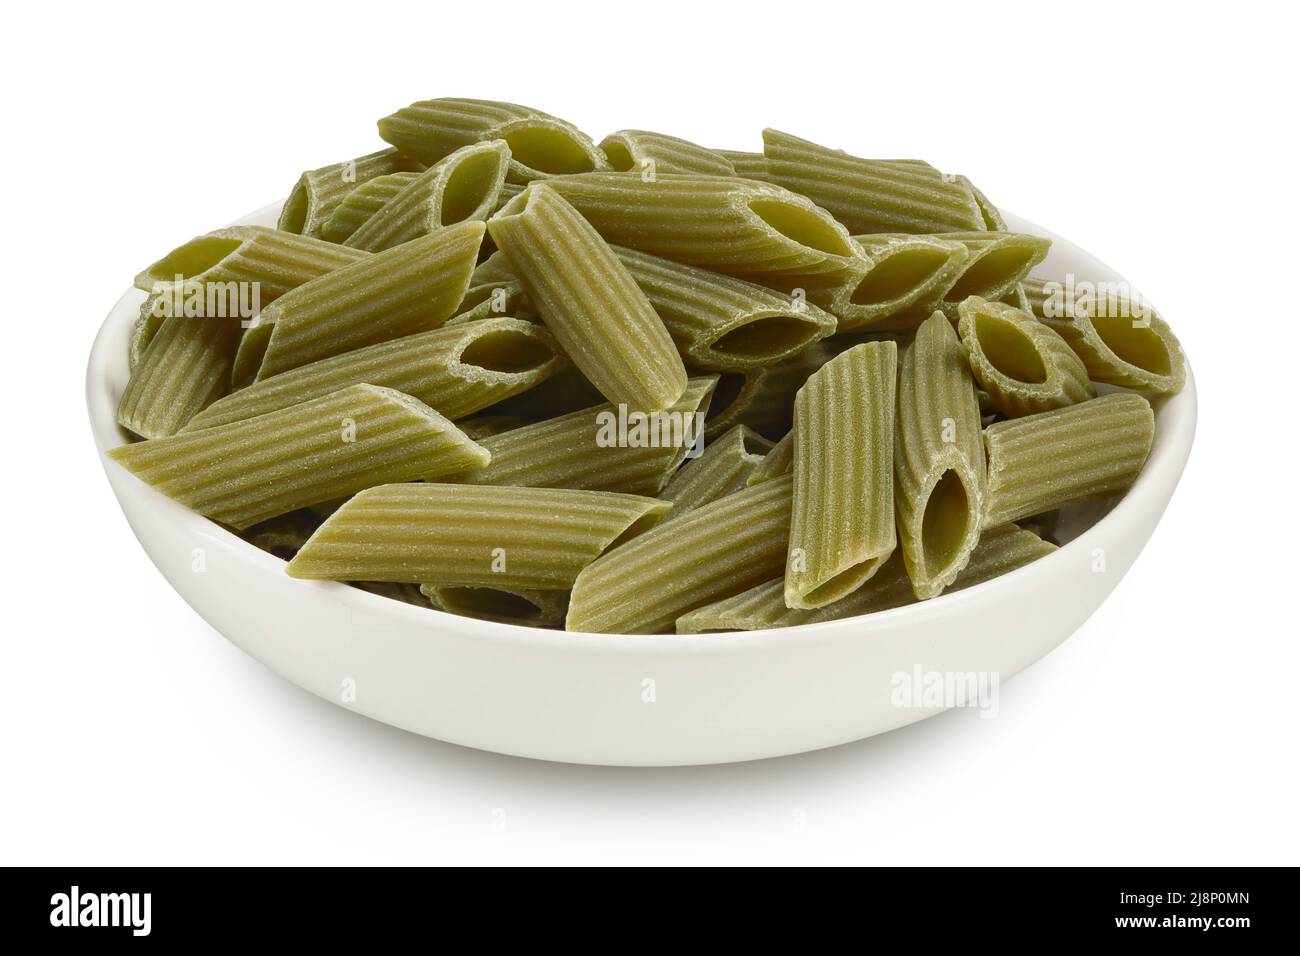 Green pea penne pasta in ceramic bowl isolated on white background with clipping path. Organic food speciality. Gluten free. Stock Photo